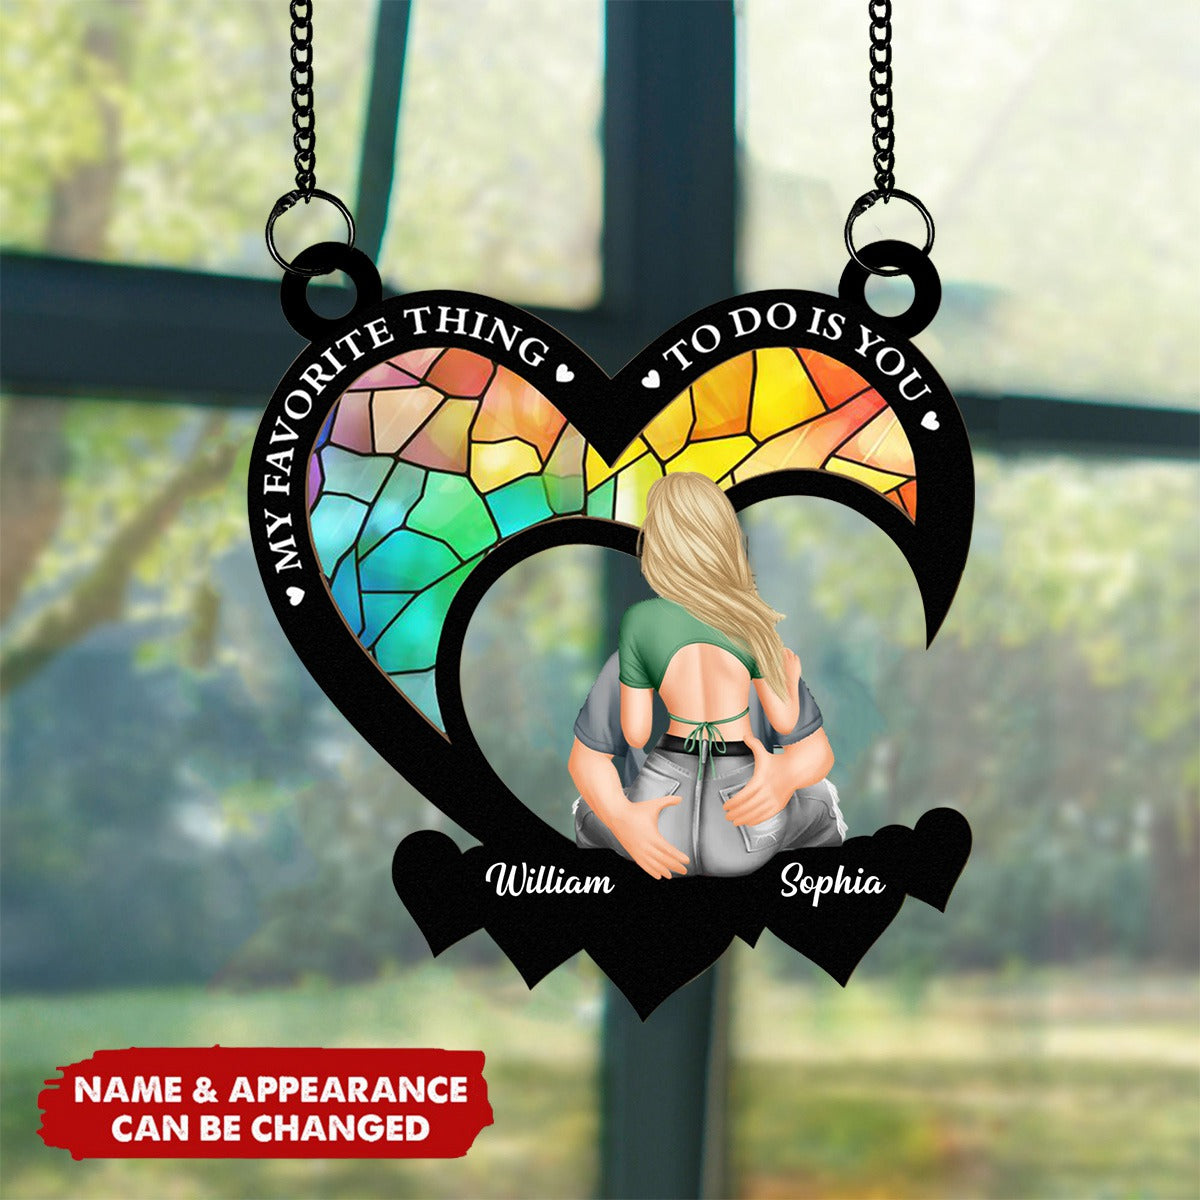 My Favorite Thing To Do Is You - Personalized Window Hanging Suncatcher Ornament